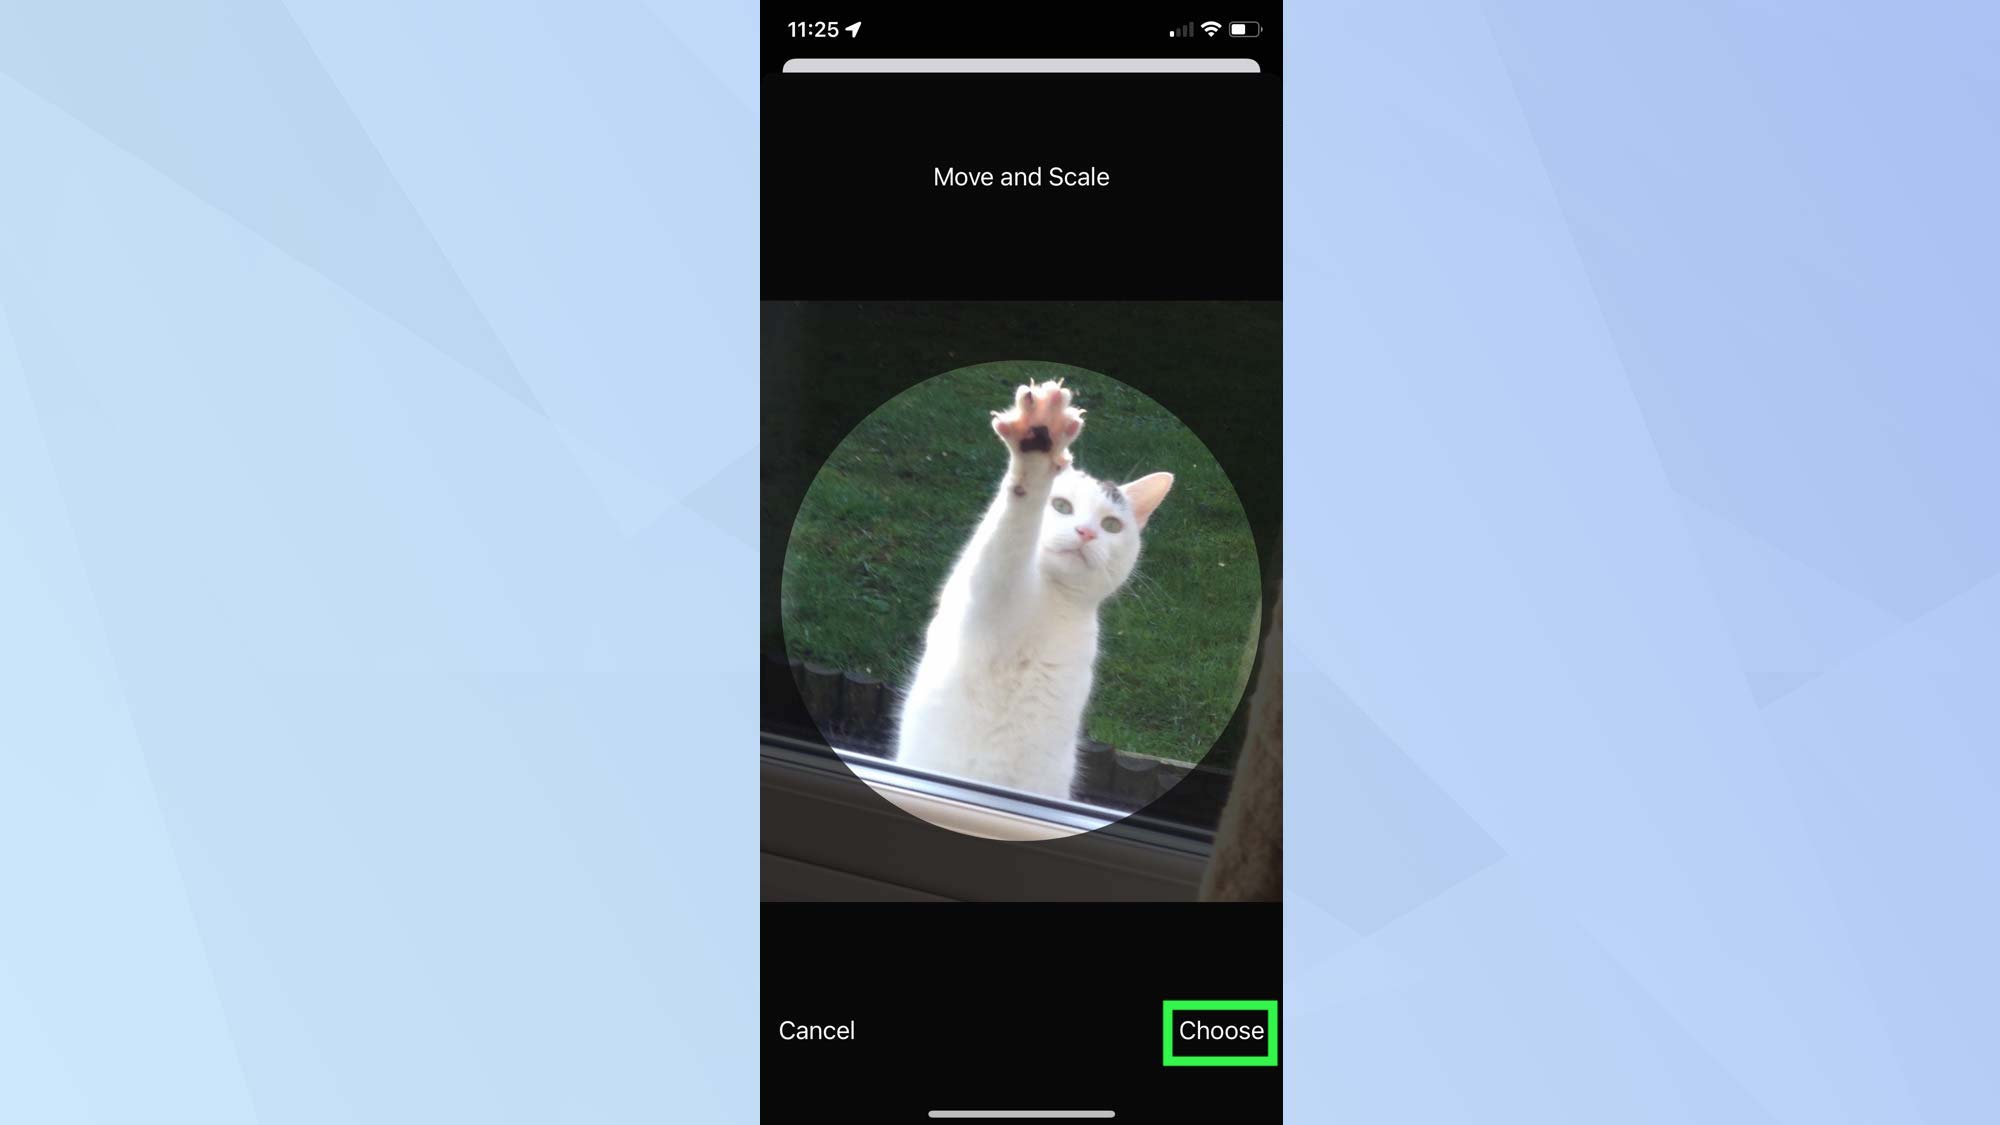 Screenshot of iOS 15 with a photo of a cat showing "move and scale" options